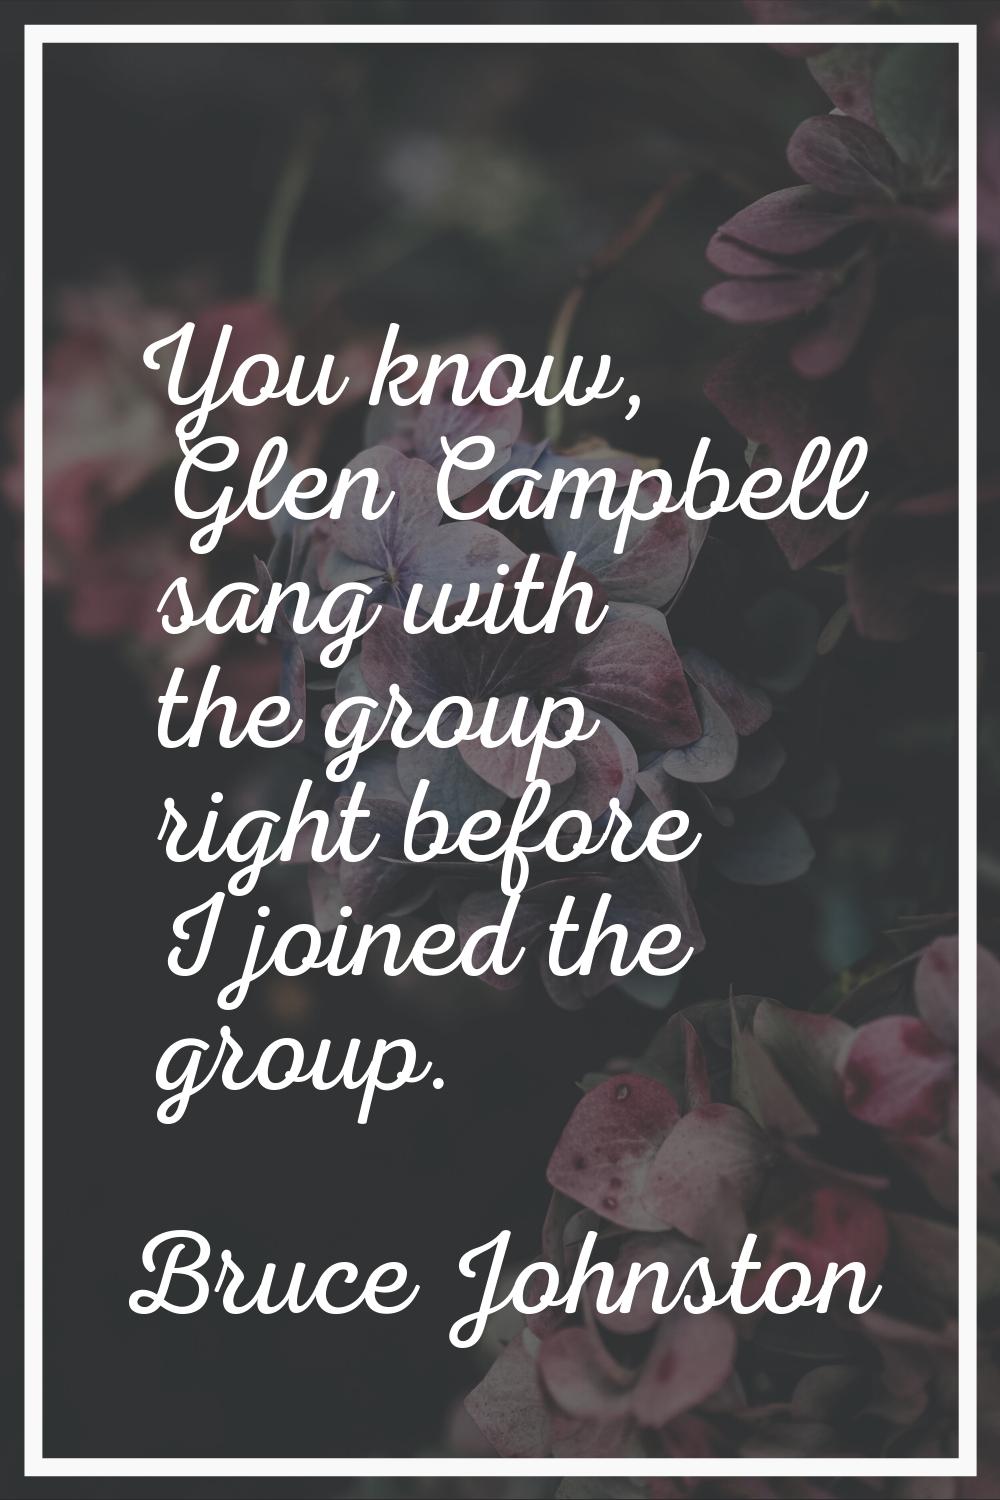 You know, Glen Campbell sang with the group right before I joined the group.